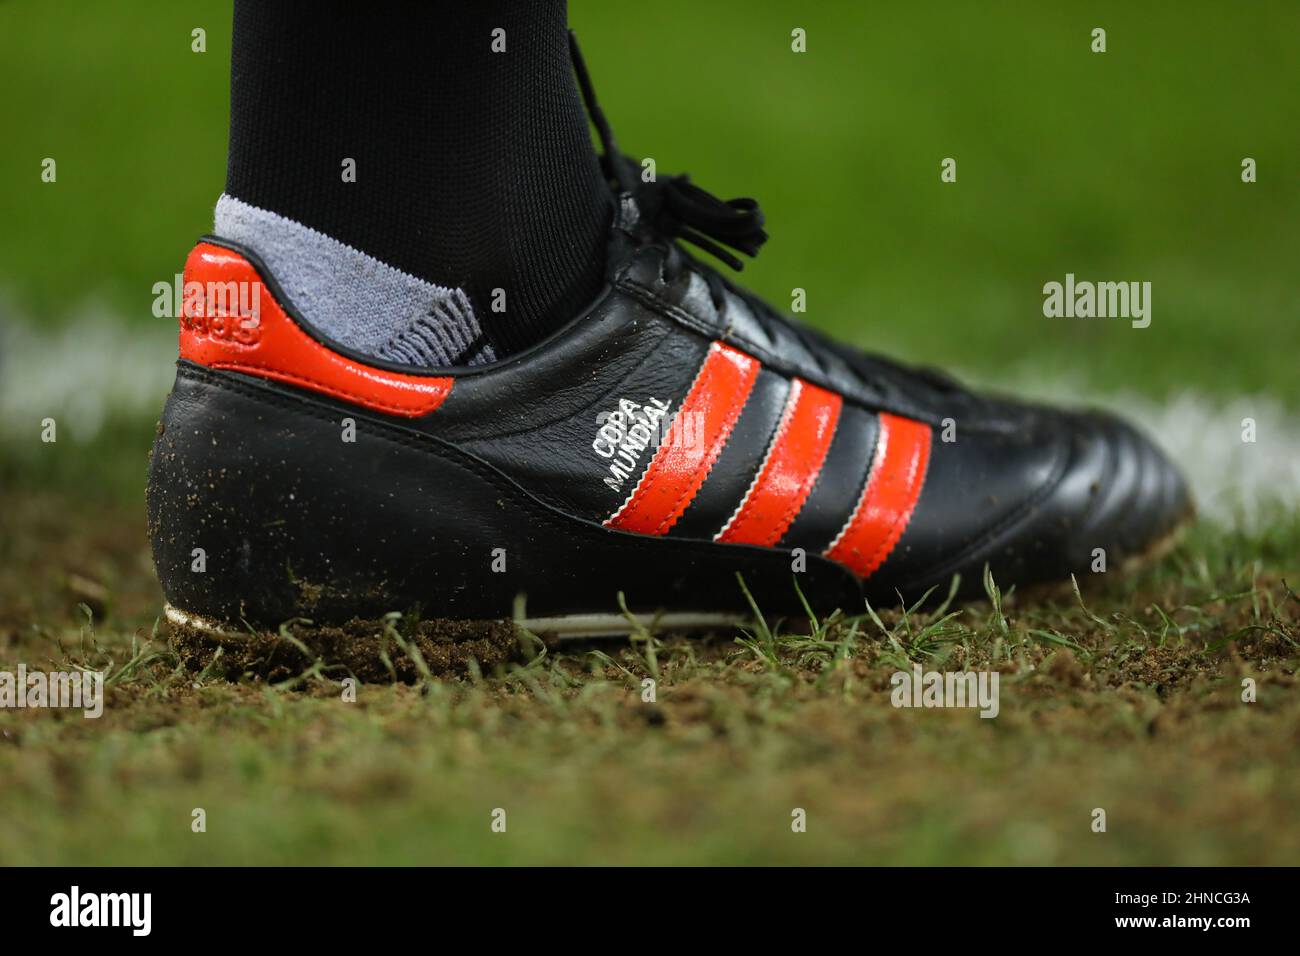 Adidas Orange Striped Copa Mundial boot - Norwich City v Manchester City, Premier League, Carrow Road, Norwich, UK - 12th February 2022 Use Only - apply Stock Photo - Alamy